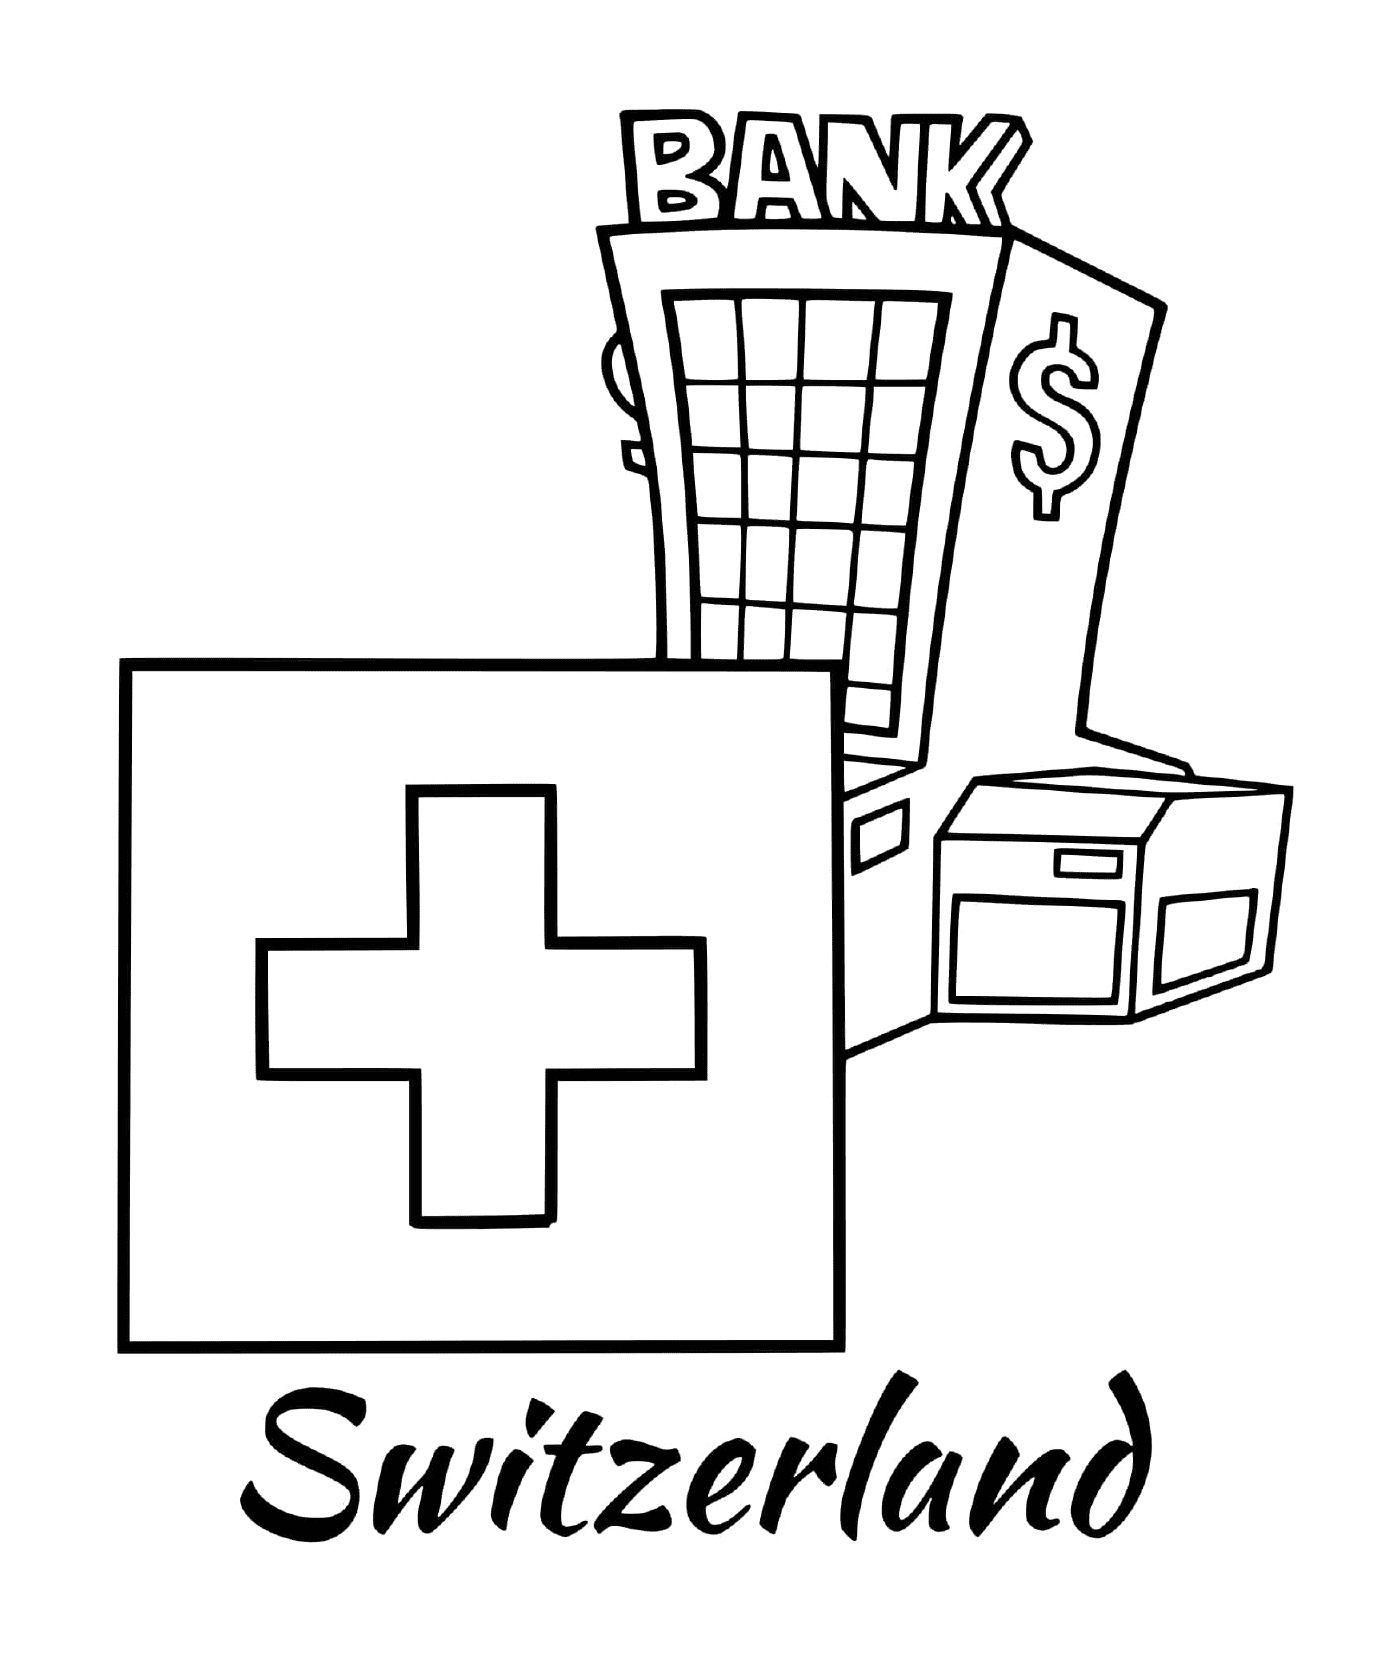  Flag of Switzerland with a bank 